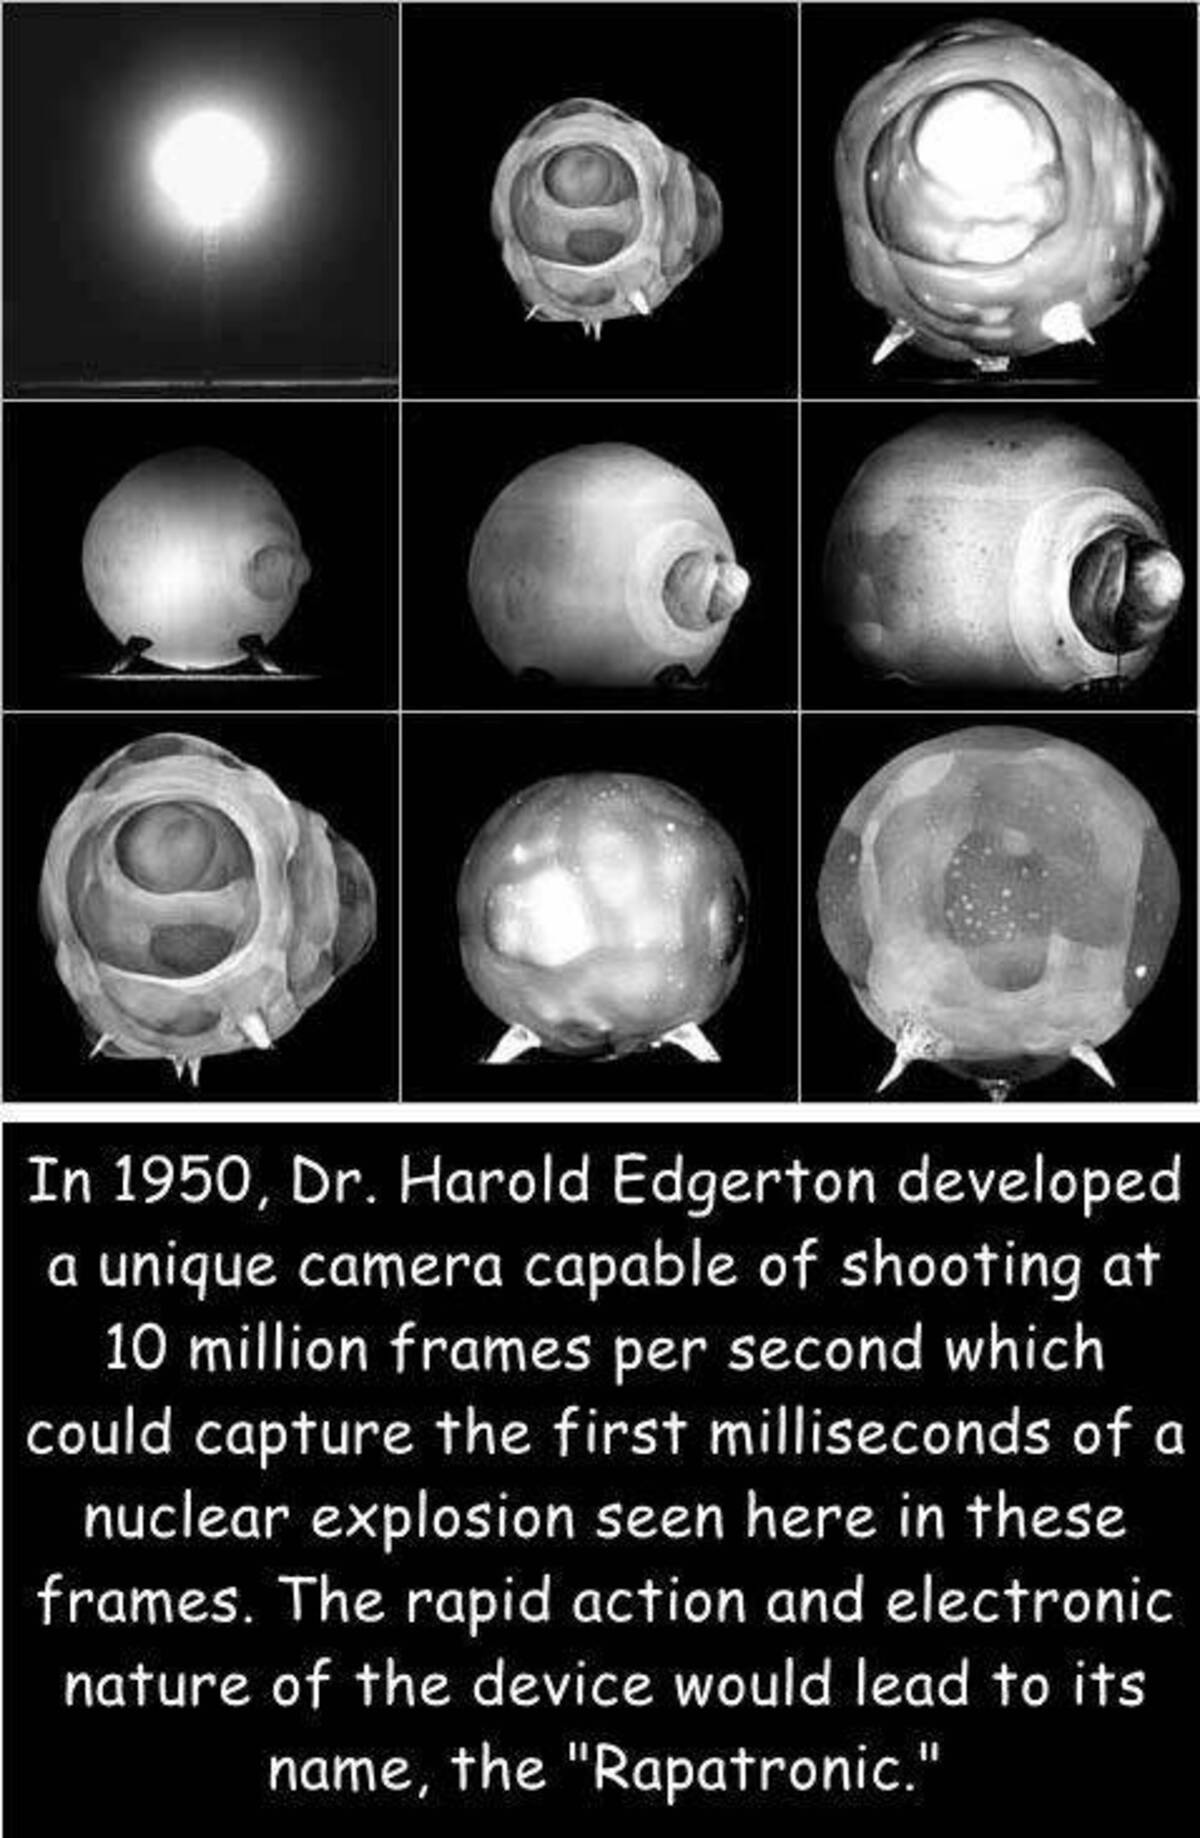 atomic bomb explosion harold e edgerton - In 1950, Dr. Harold Edgerton developed a unique camera capable of shooting at 10 million frames per second which could capture the first milliseconds of a nuclear explosion seen here in these frames. The rapid act